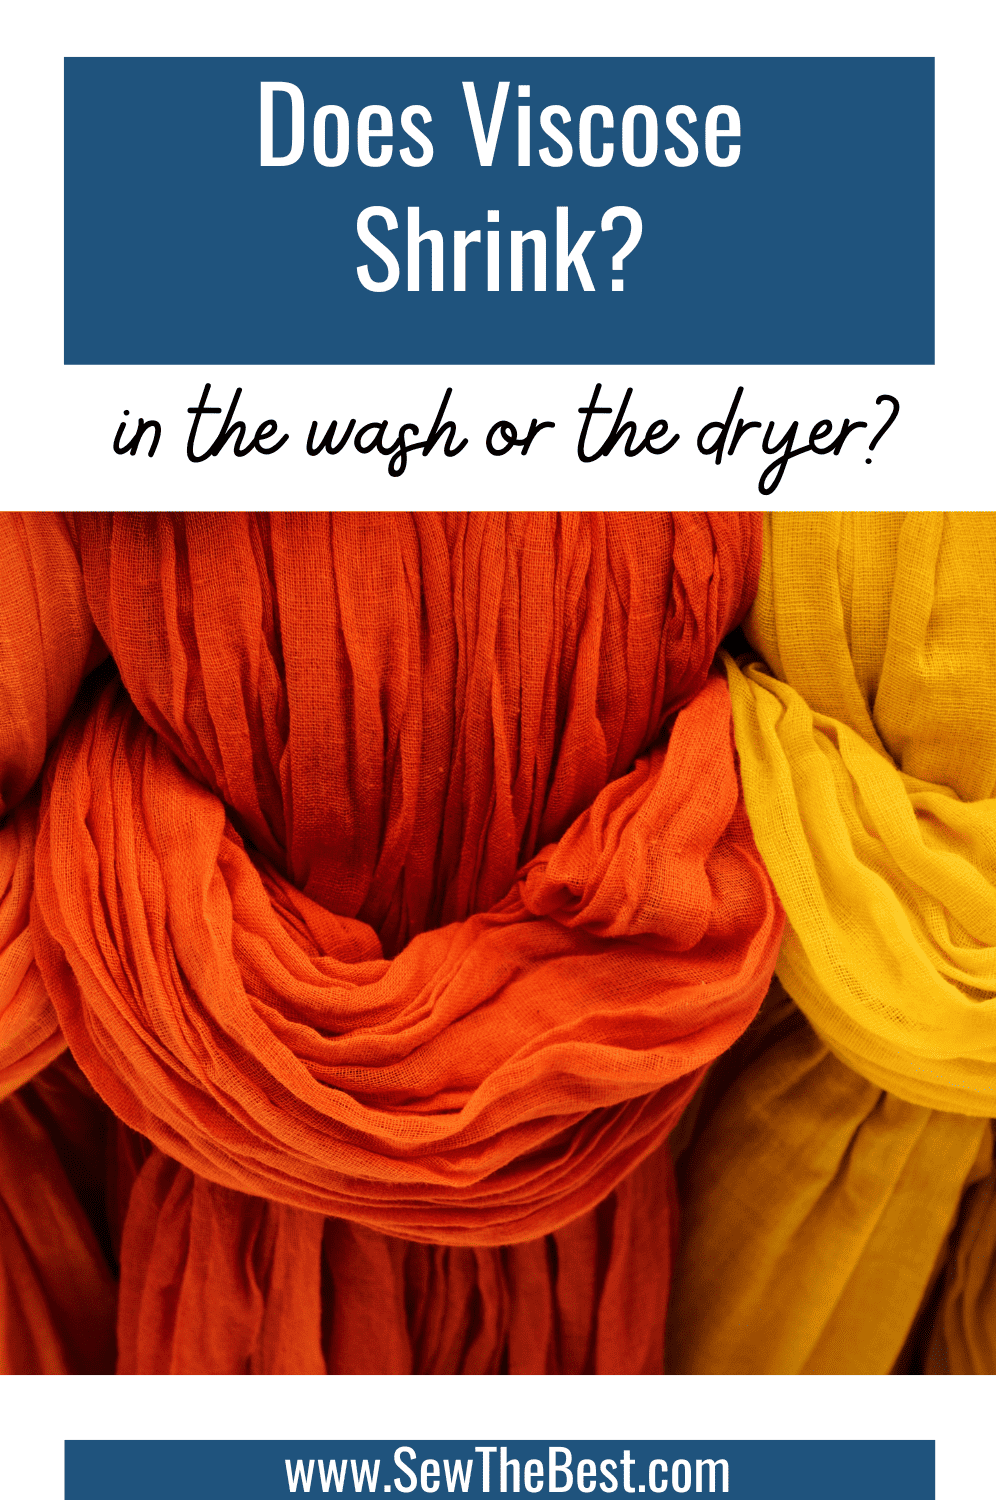 Does Viscose Fabric Shrink in the Wash or Dryer?